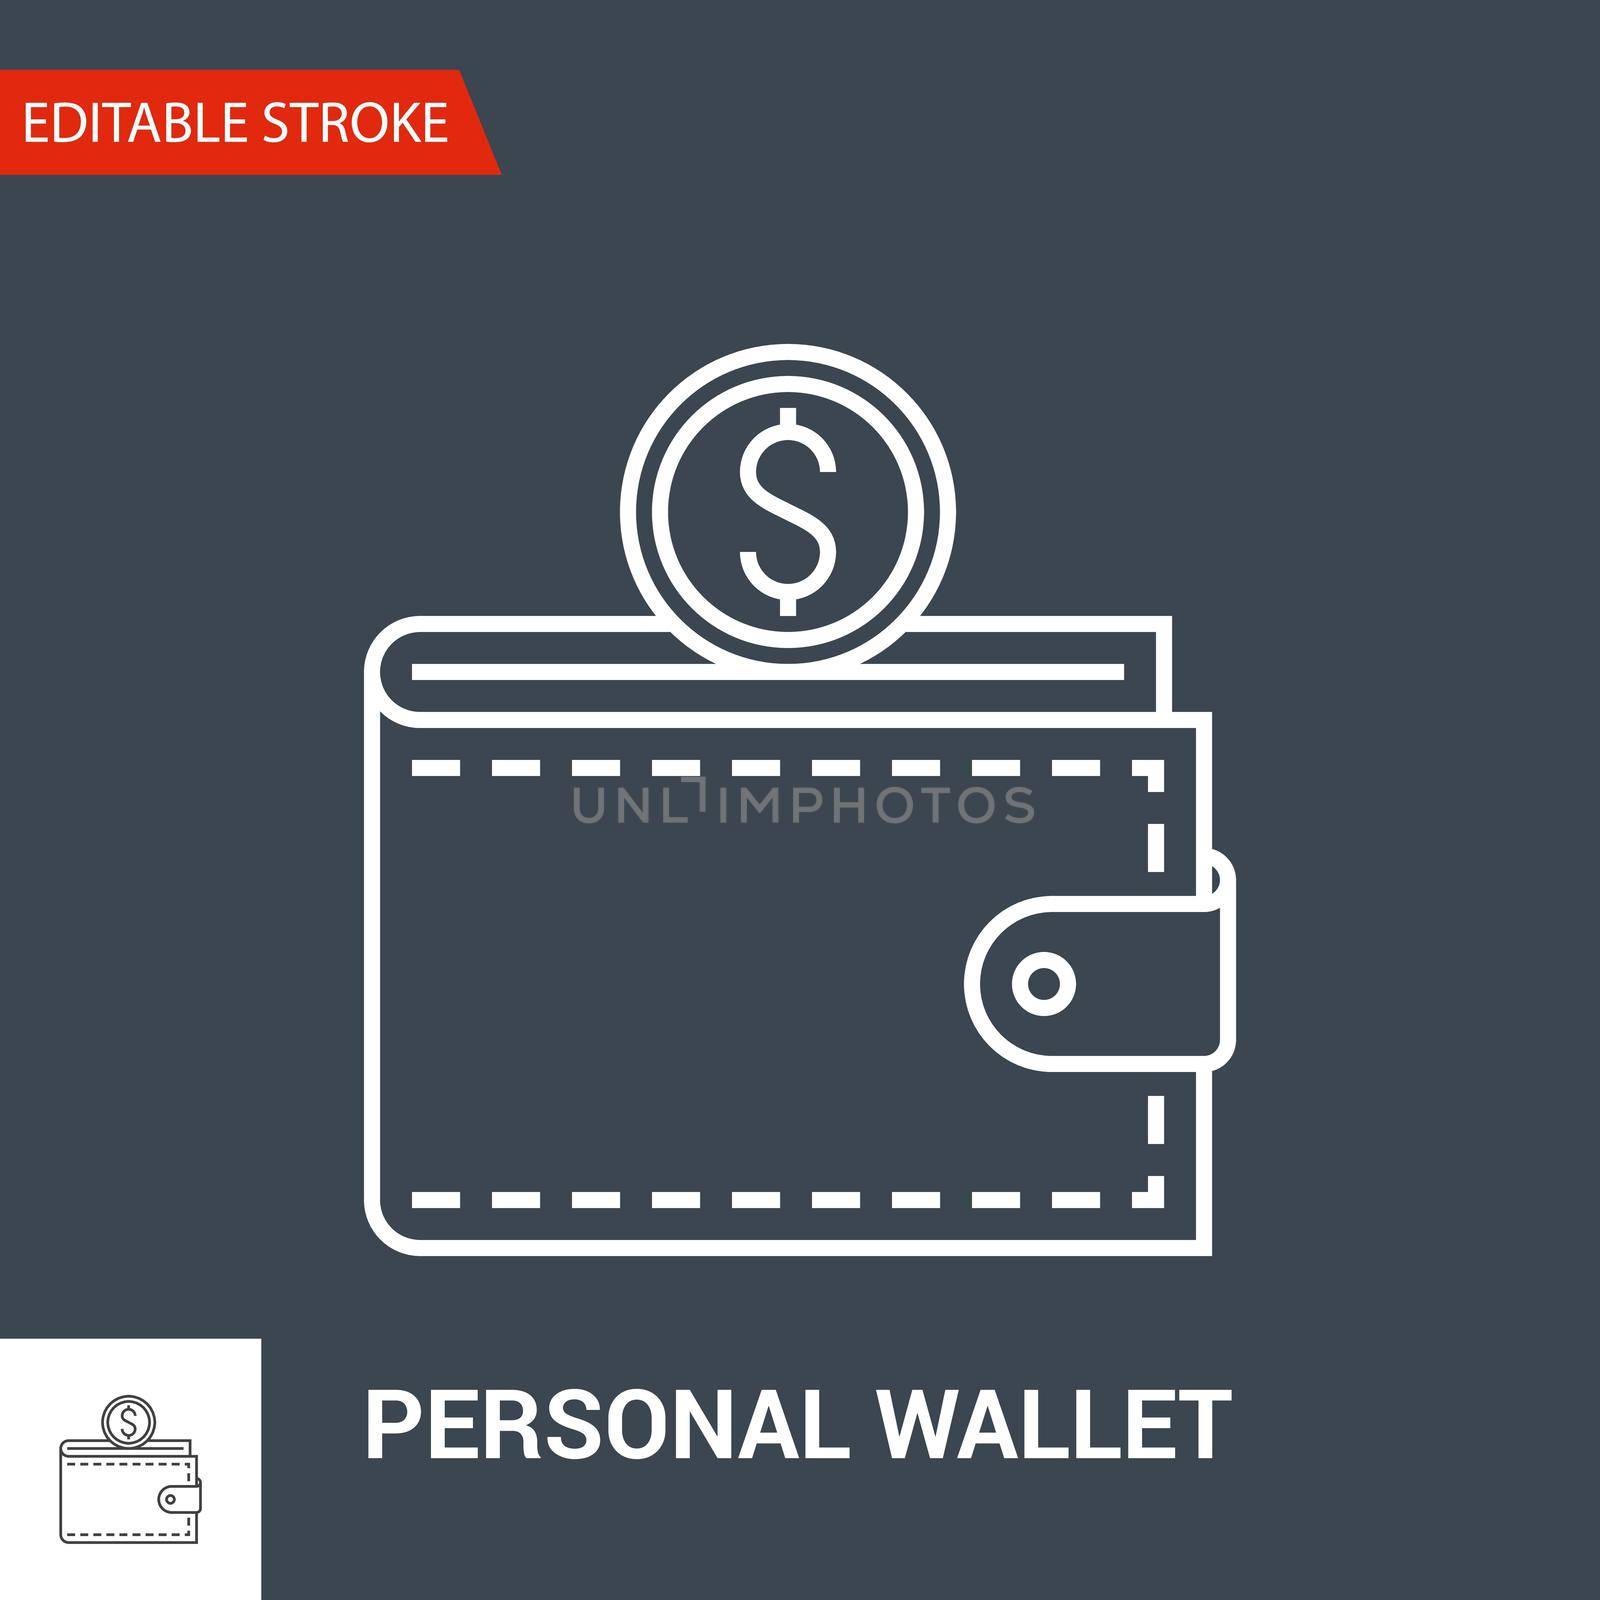 Personal Wallet Icon. Thin Line Vector Illustration. Adjust stroke weight - Expand to any Size - Easy Change Colour - Editable Stroke